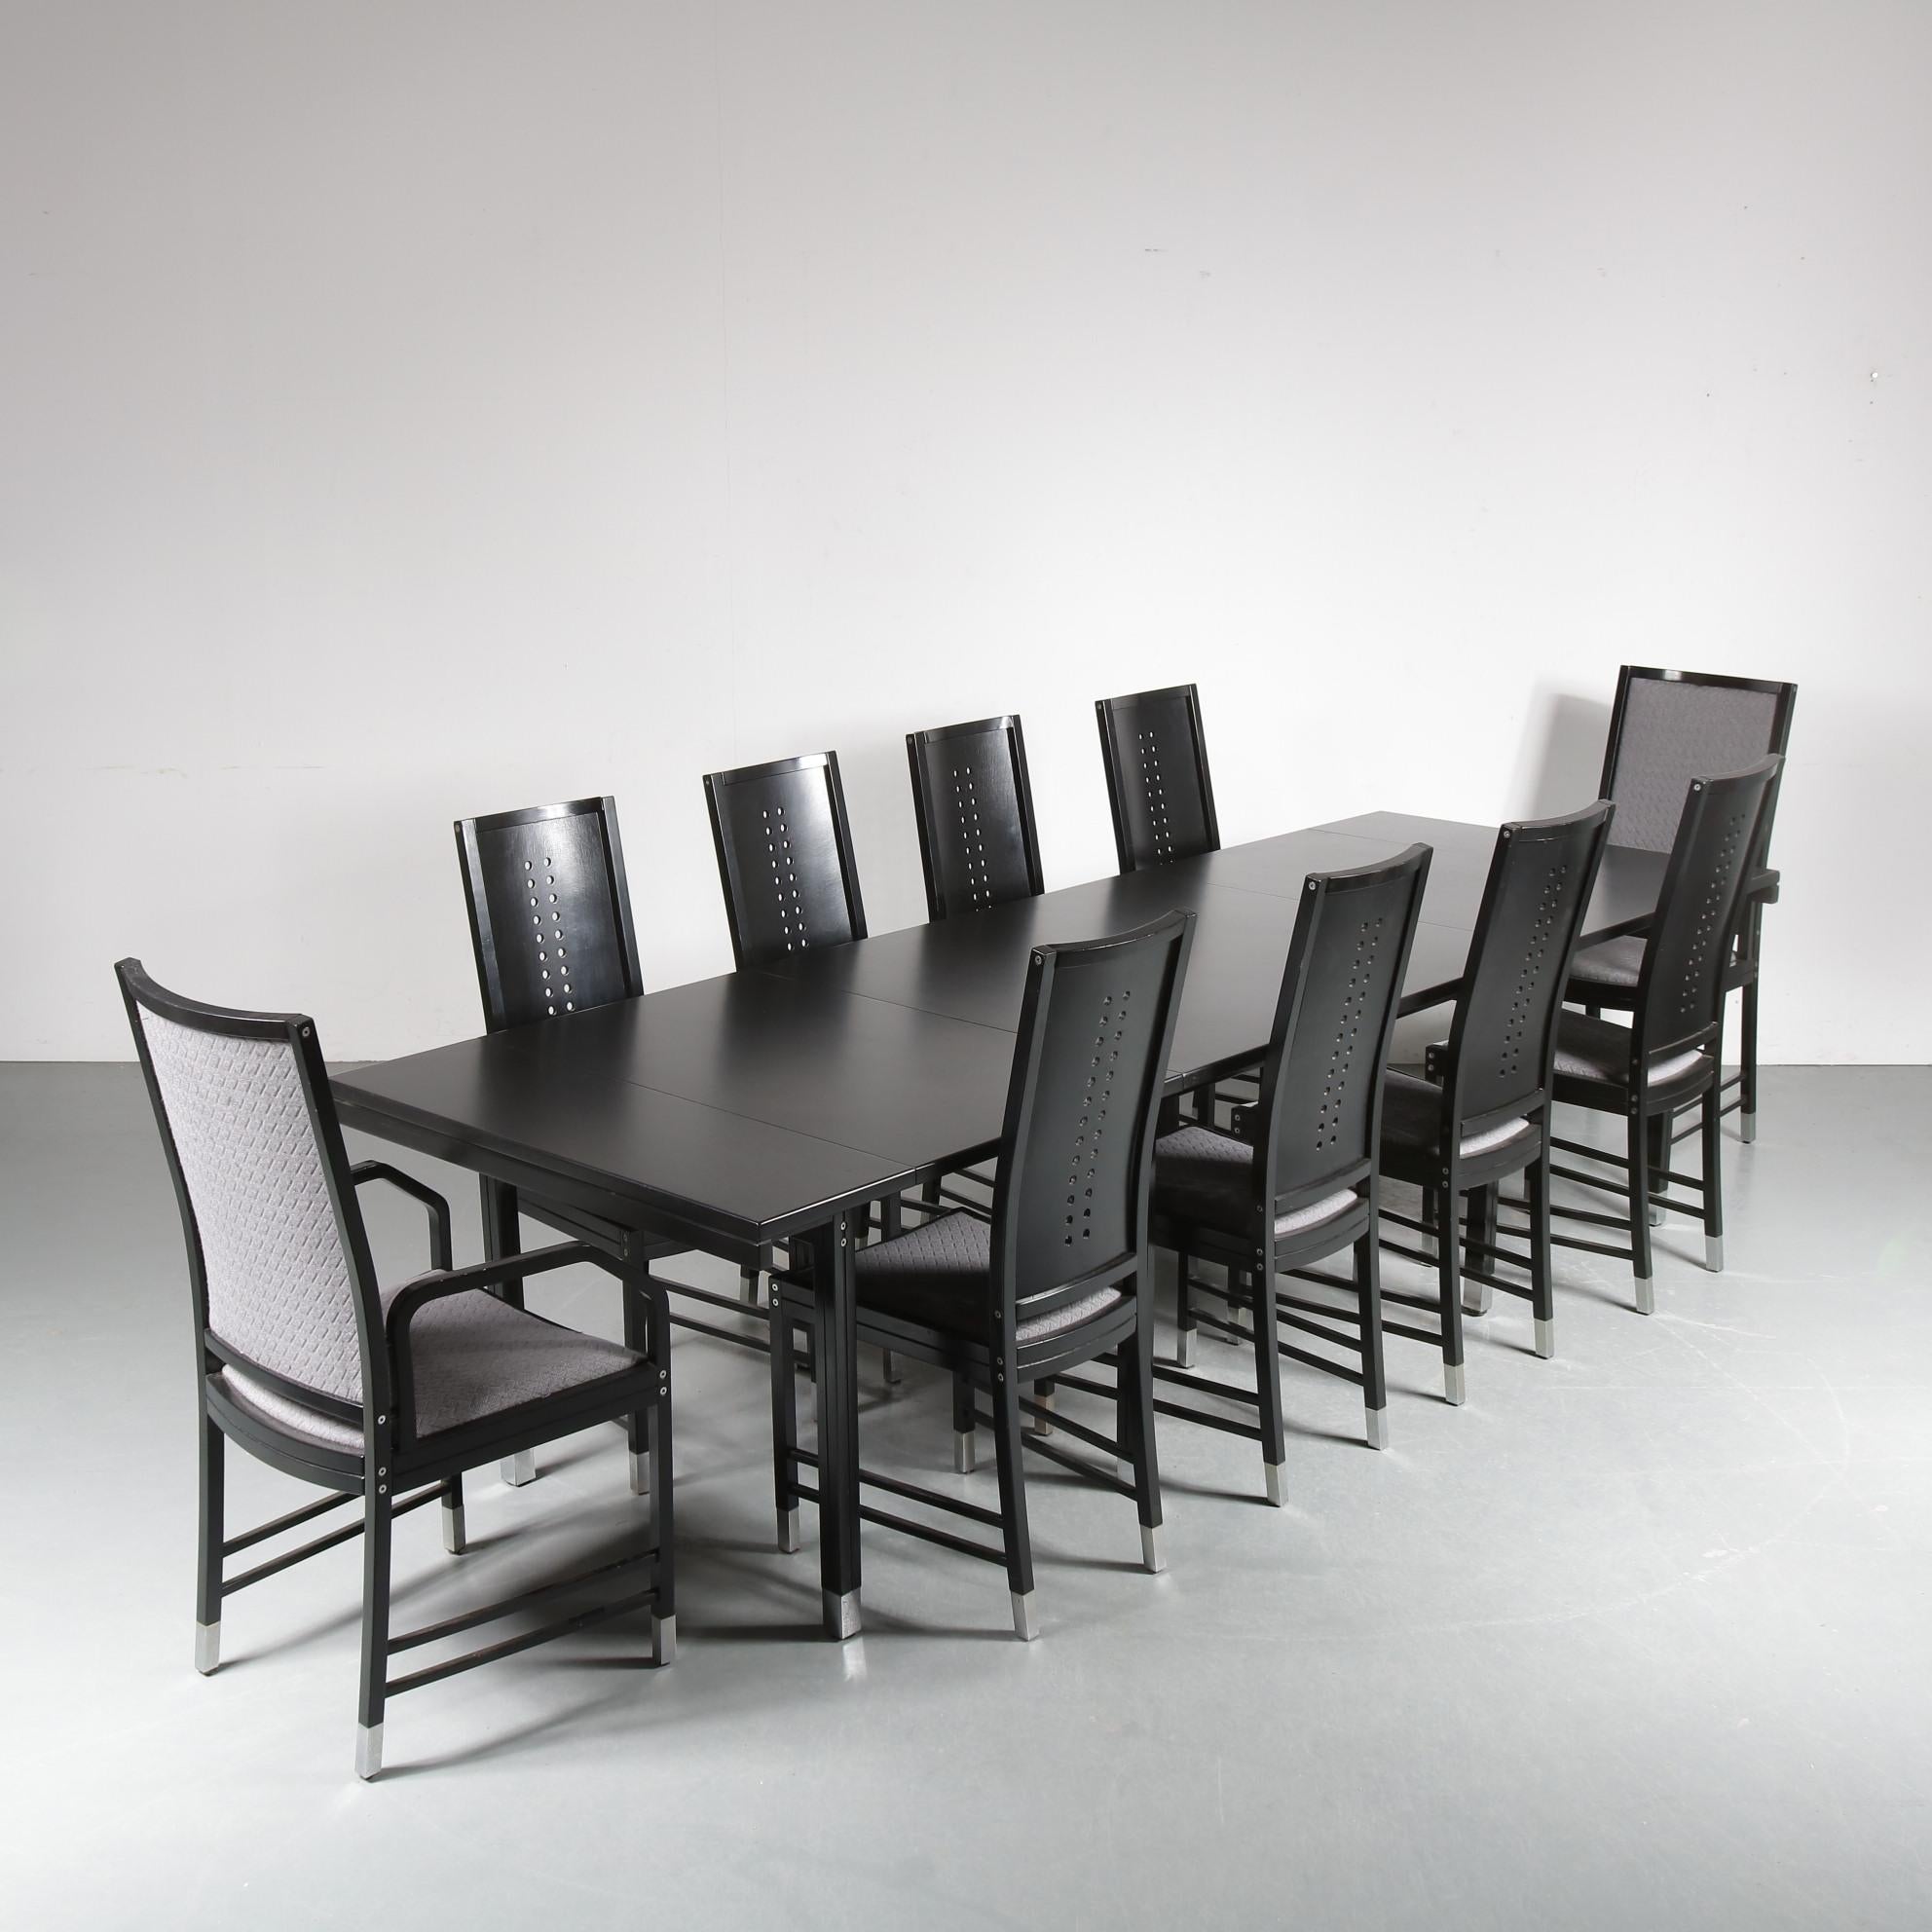 An impressive set of ten dining chairs with extendible dining table, designed by Ernst W. Beranek and manufactured by Thonet in Austria around 1980.

This eye-catching set is made of high quality black wood. The table and chairs all have chrome